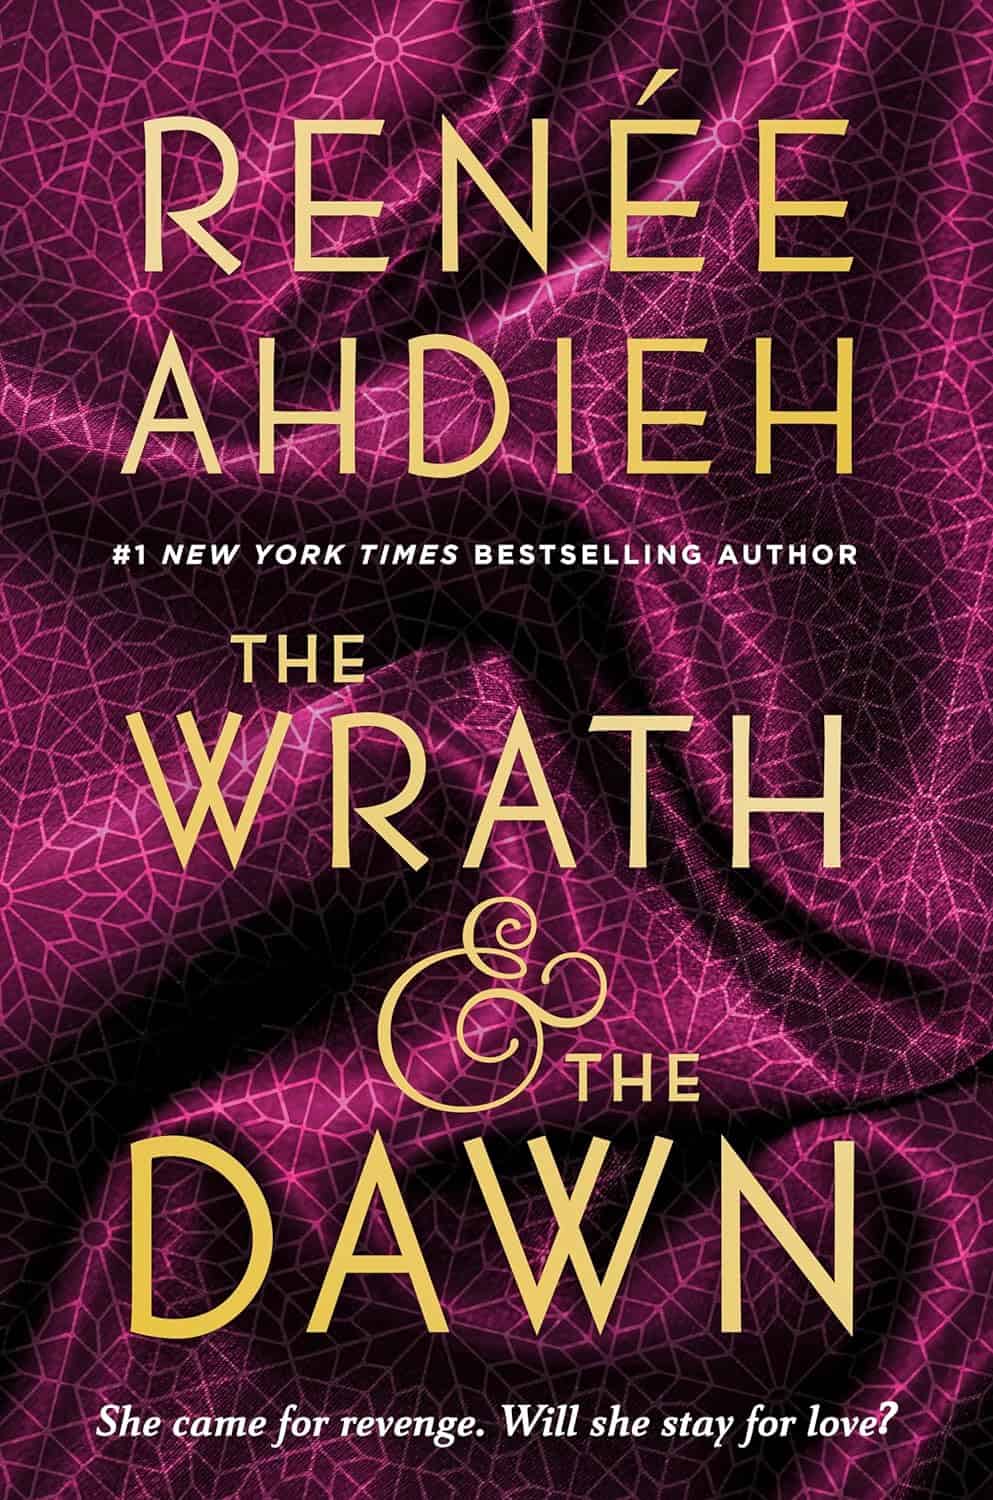 The Wrath And The Dawn by Renee Ahdieh